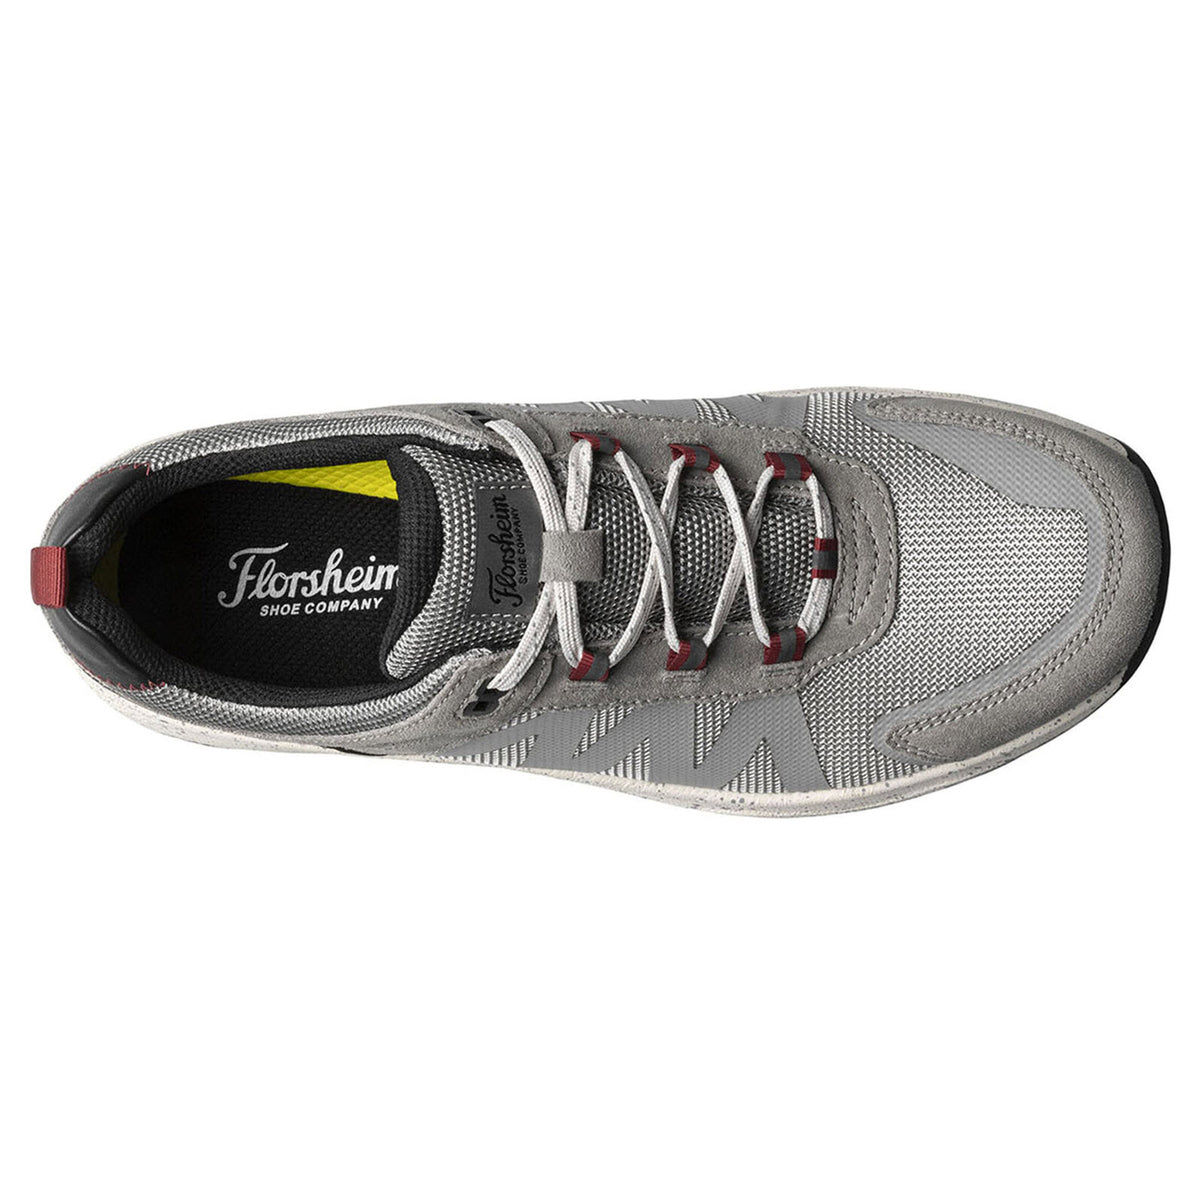 Top view of a gray Florsheim Tread Lite Mesh Lace sneaker with red and black accents, displaying laces and a visible brand label inside.